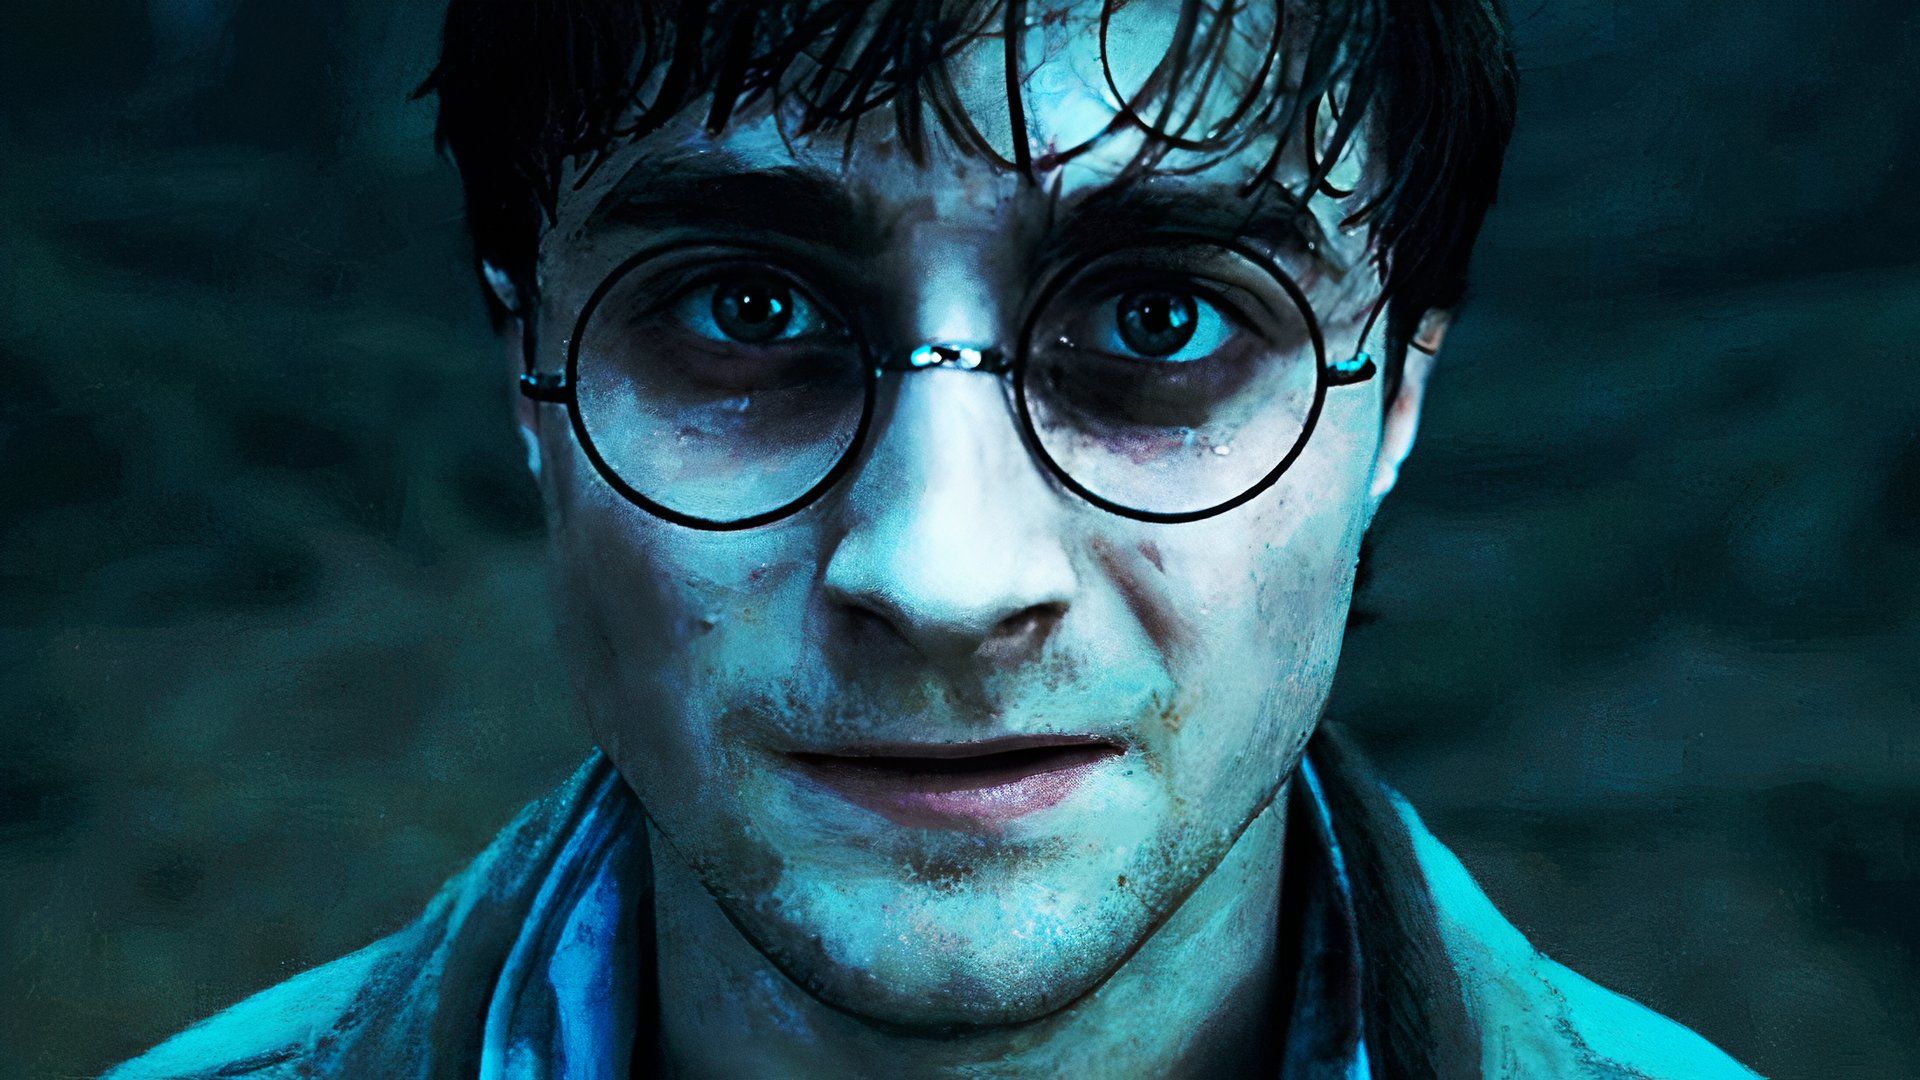 Daniel Radcliffe Can’t Wait for the Harry Potter TV Show to Adapt This Book